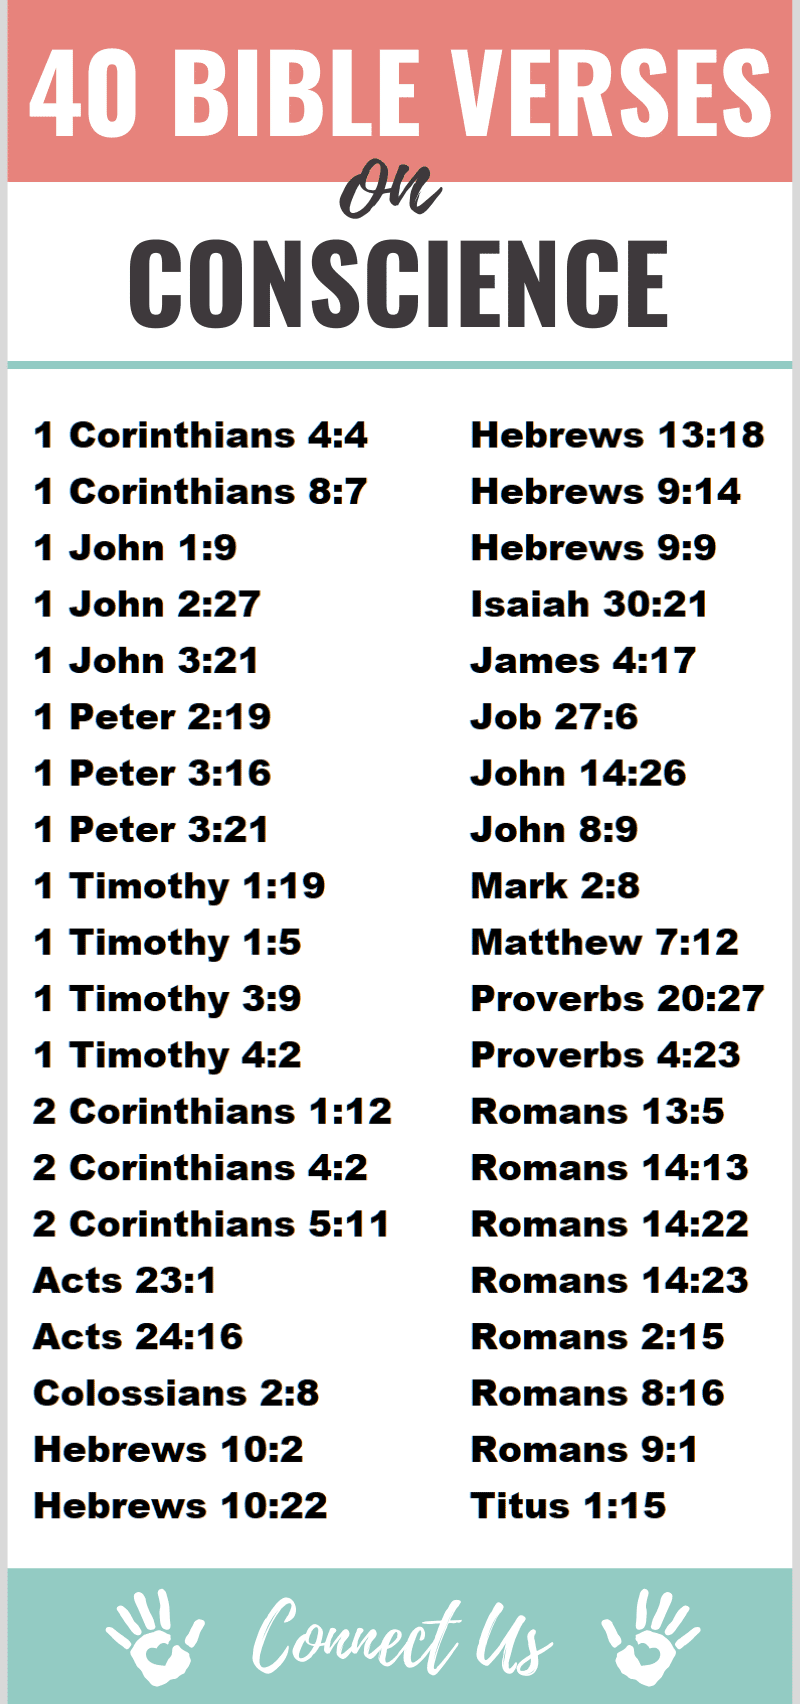 Bible Verses on Conscience